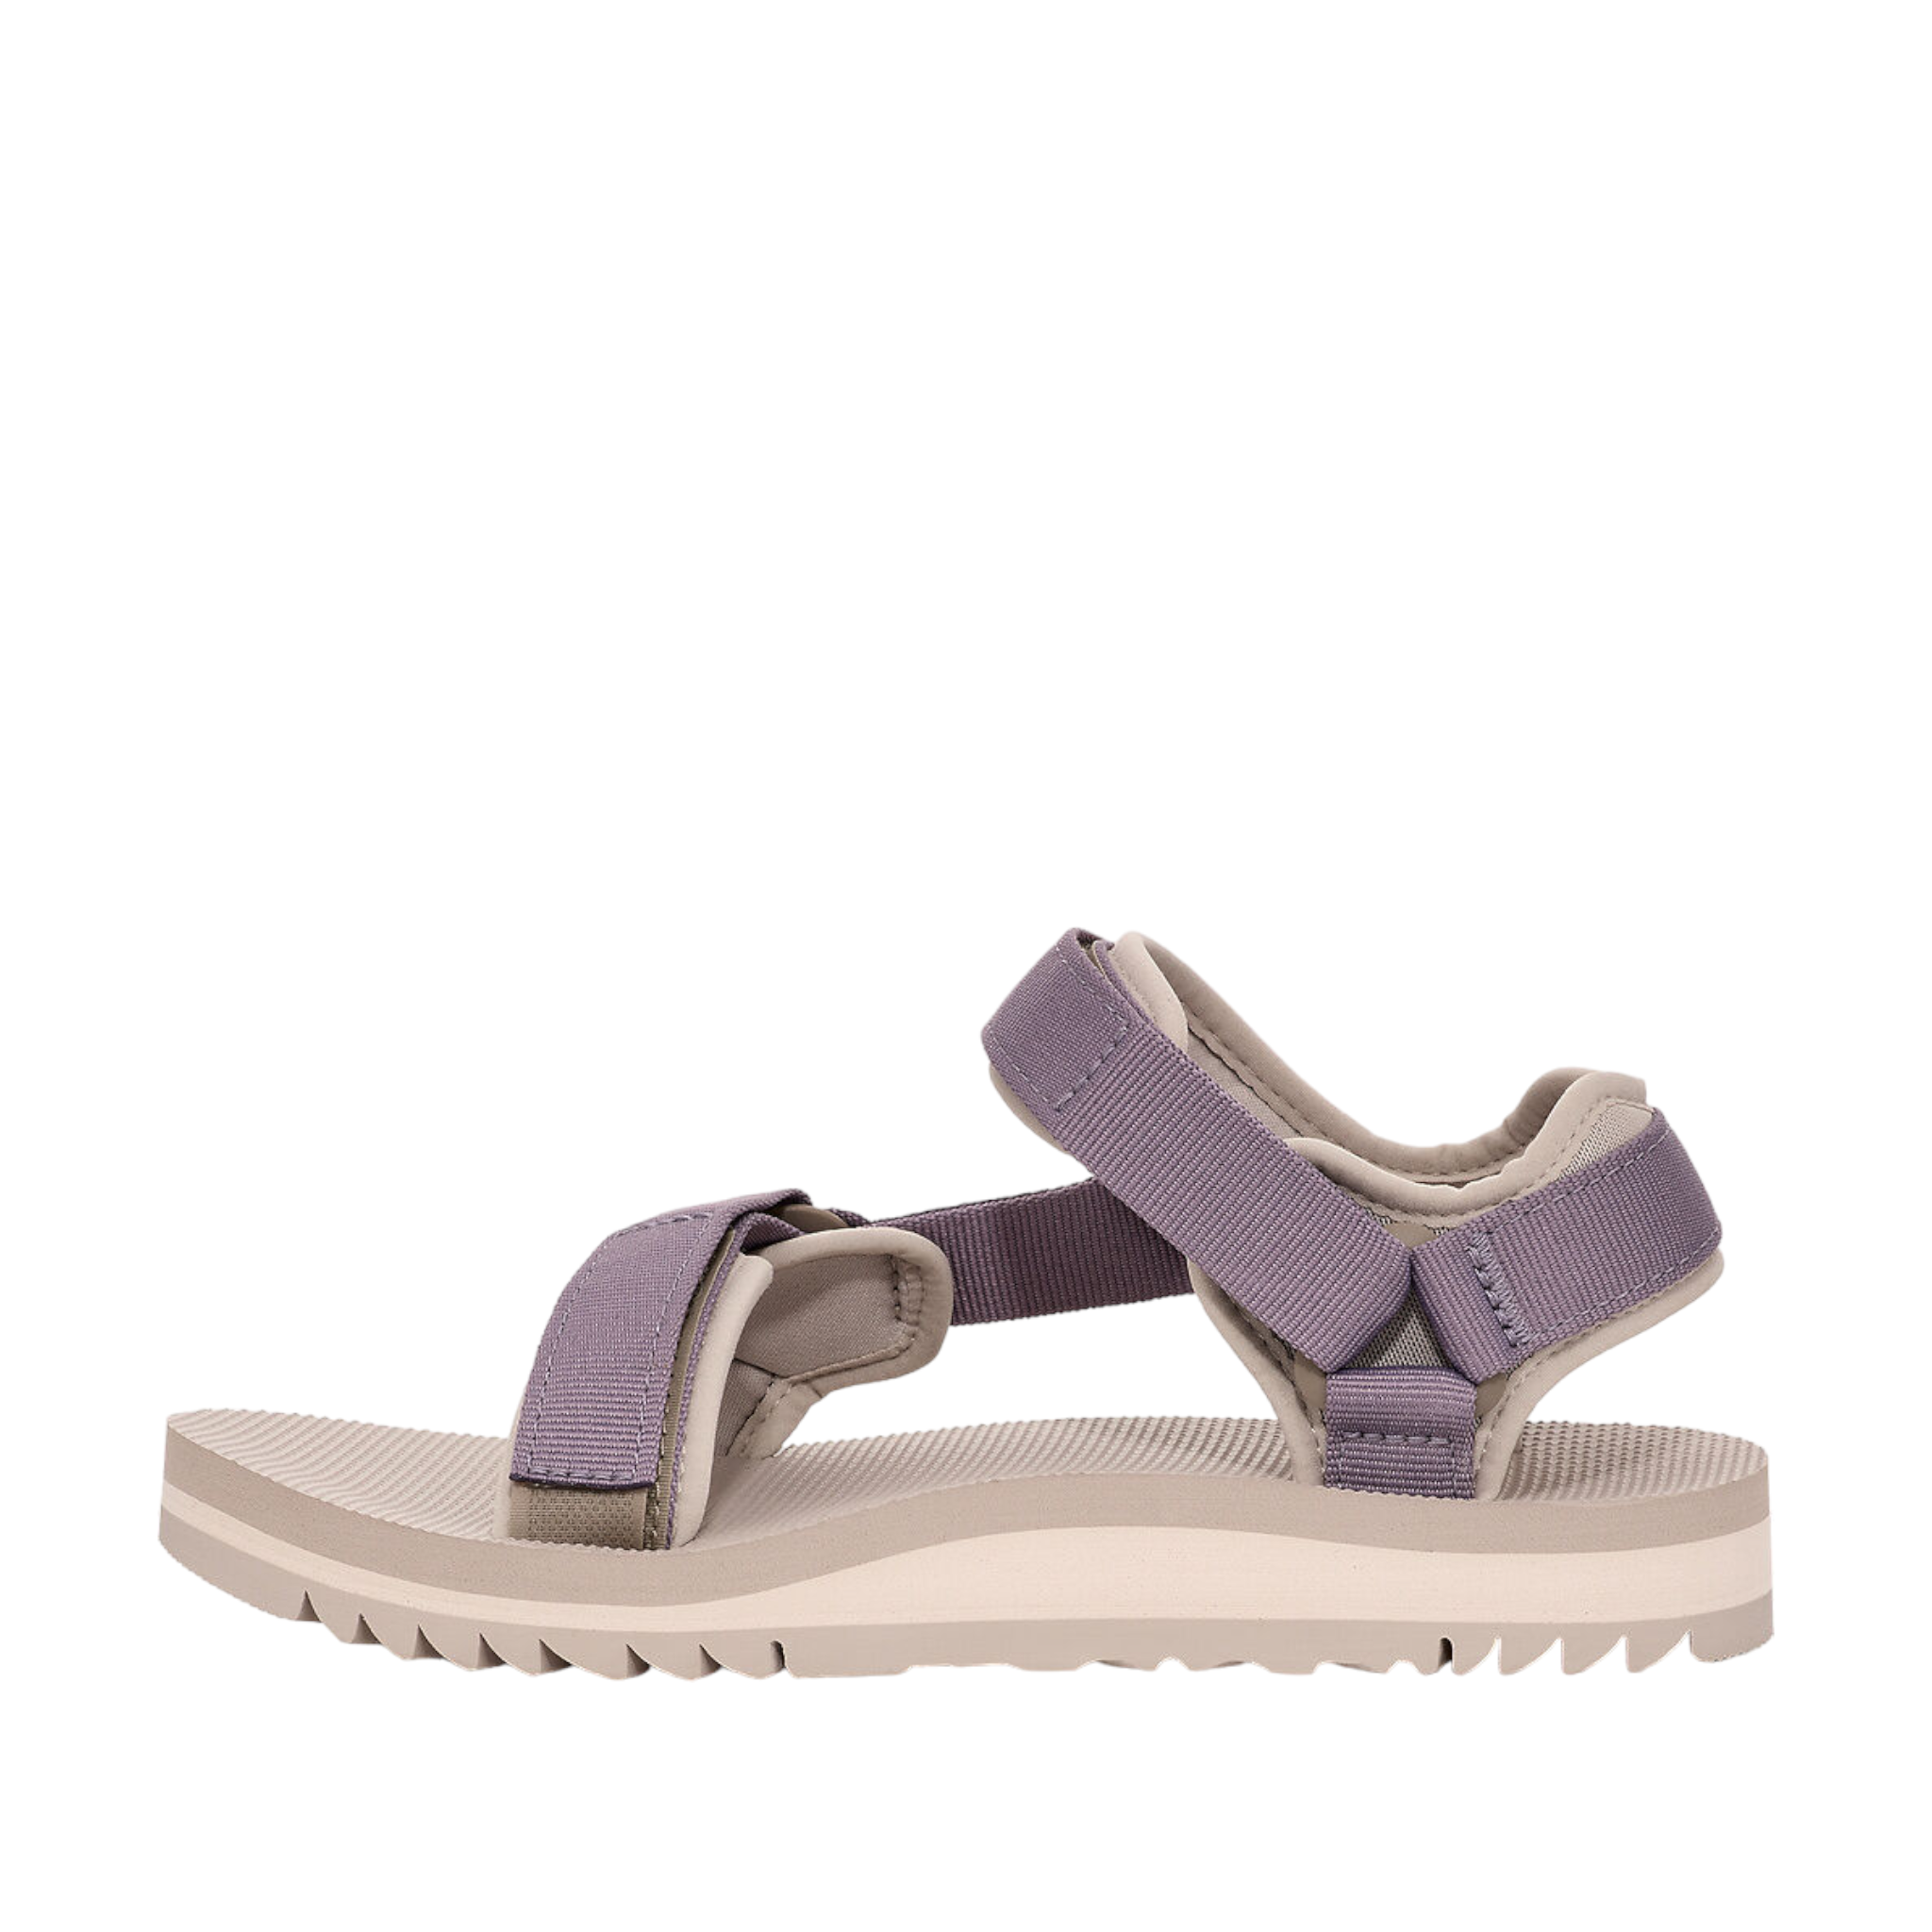 Shop W Universal Trail - with shoe&me - from Teva - Sandals - Sandal, Summer, Womens